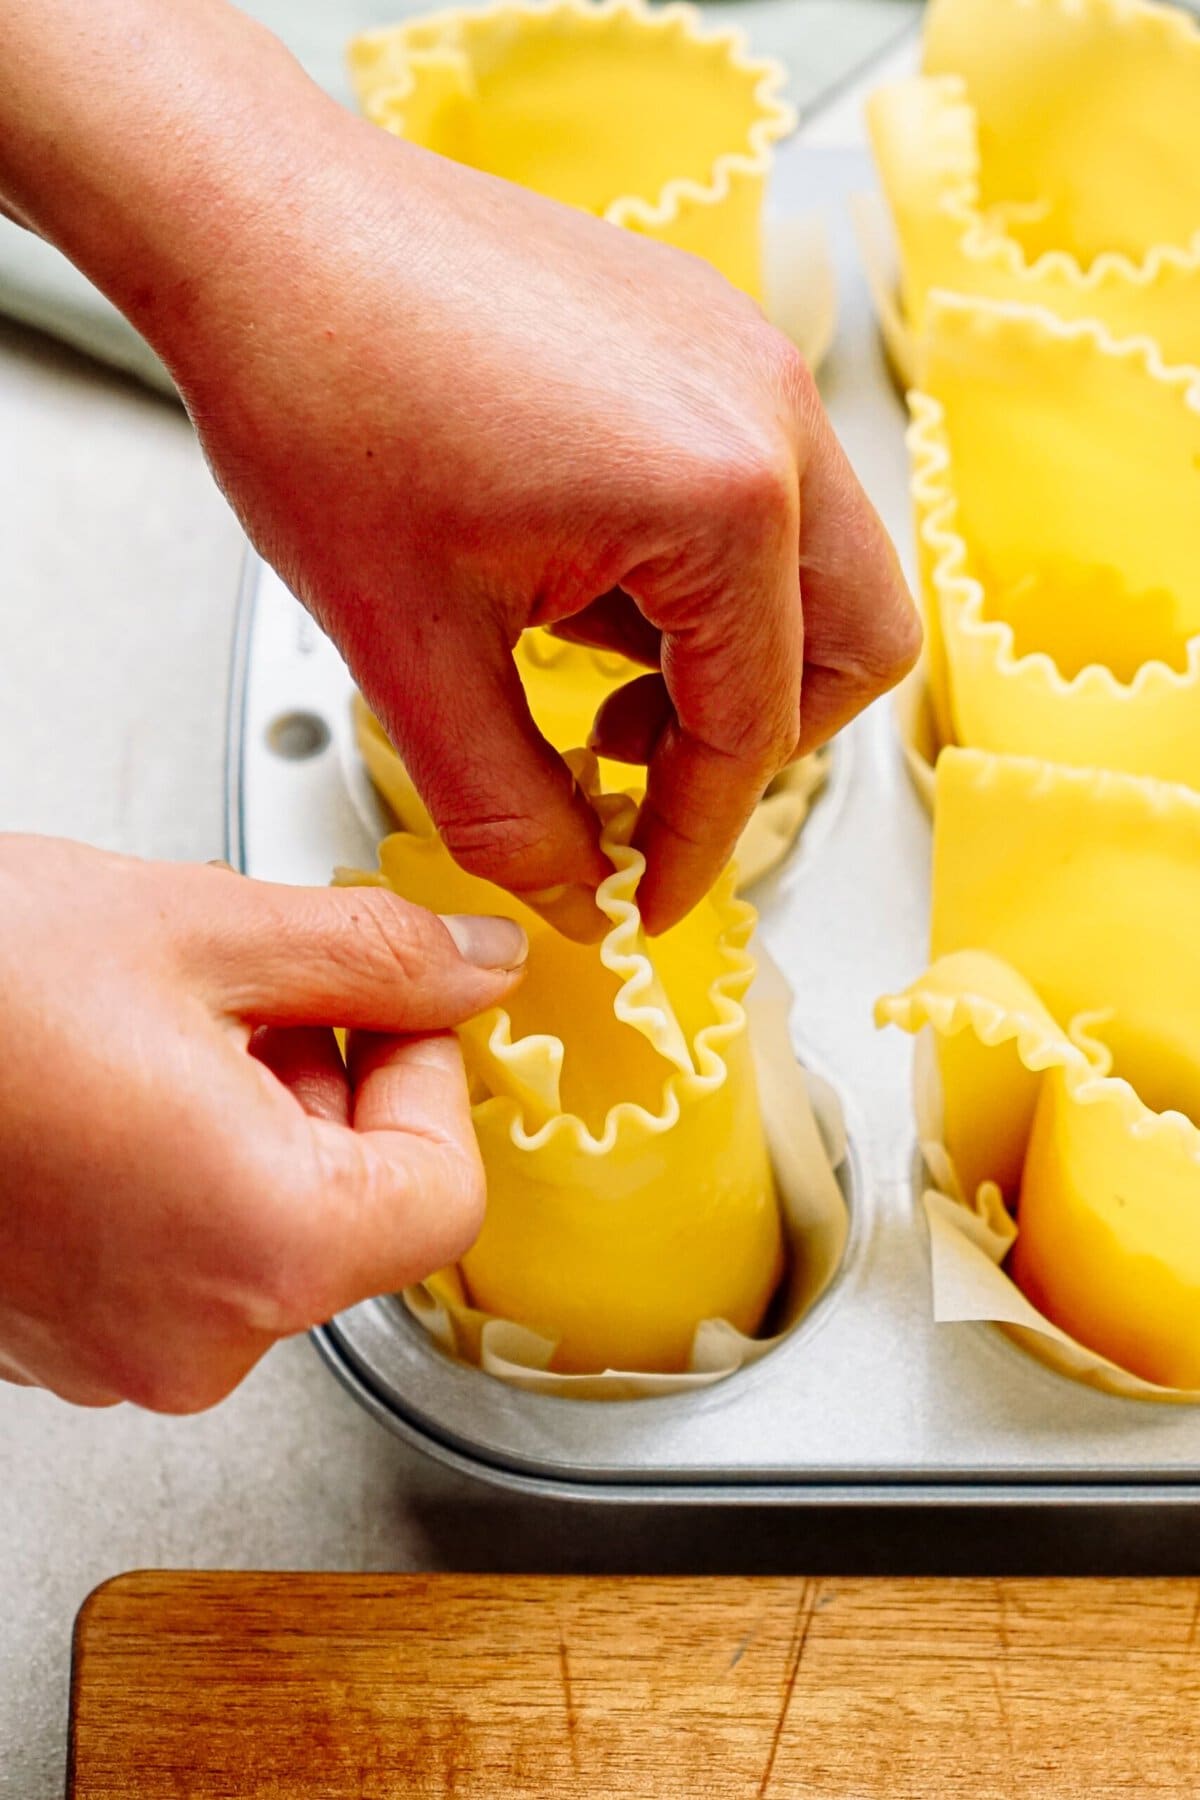 Hands assembling lasagna cups in a muffin tin, with uncooked lasagna noodles being shaped and placed individually.